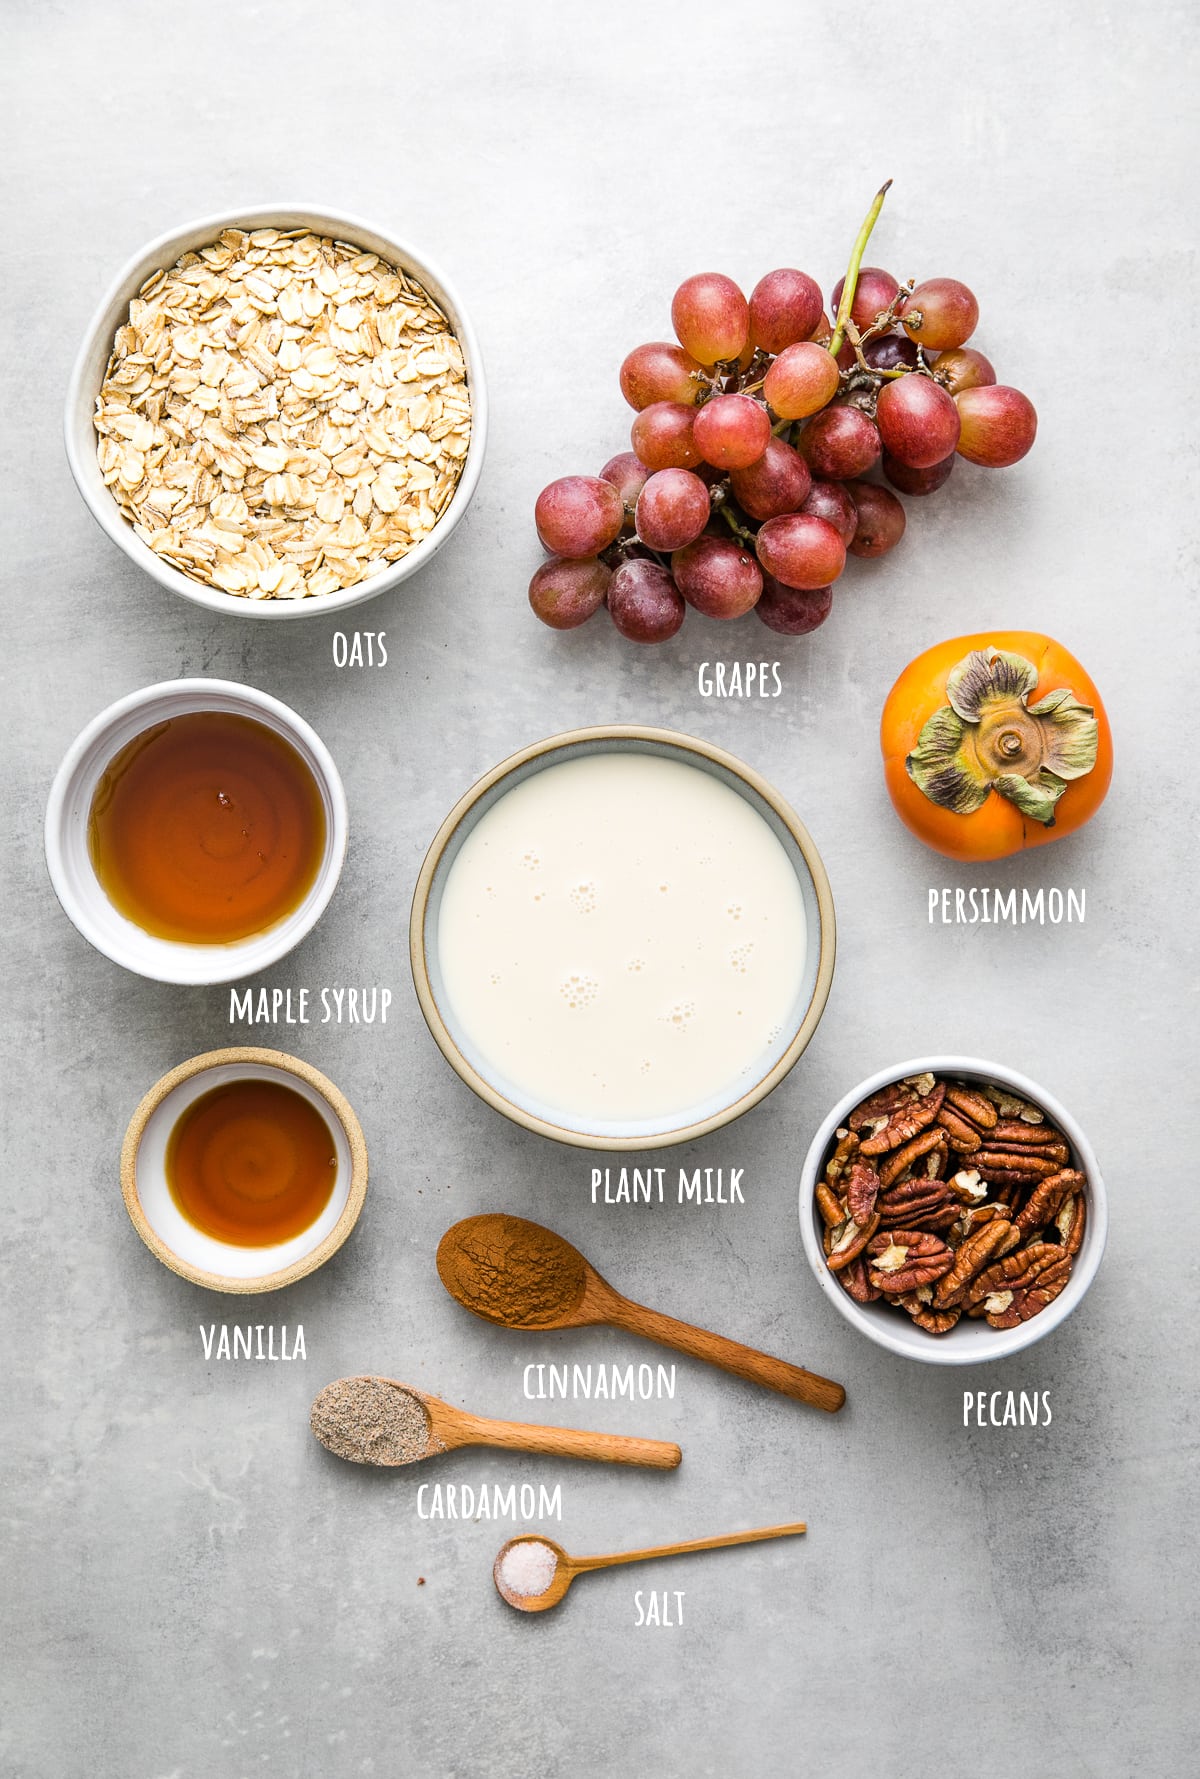 top down view of ingredients used to make healthy baked oatmeal with persimmon and grapes.